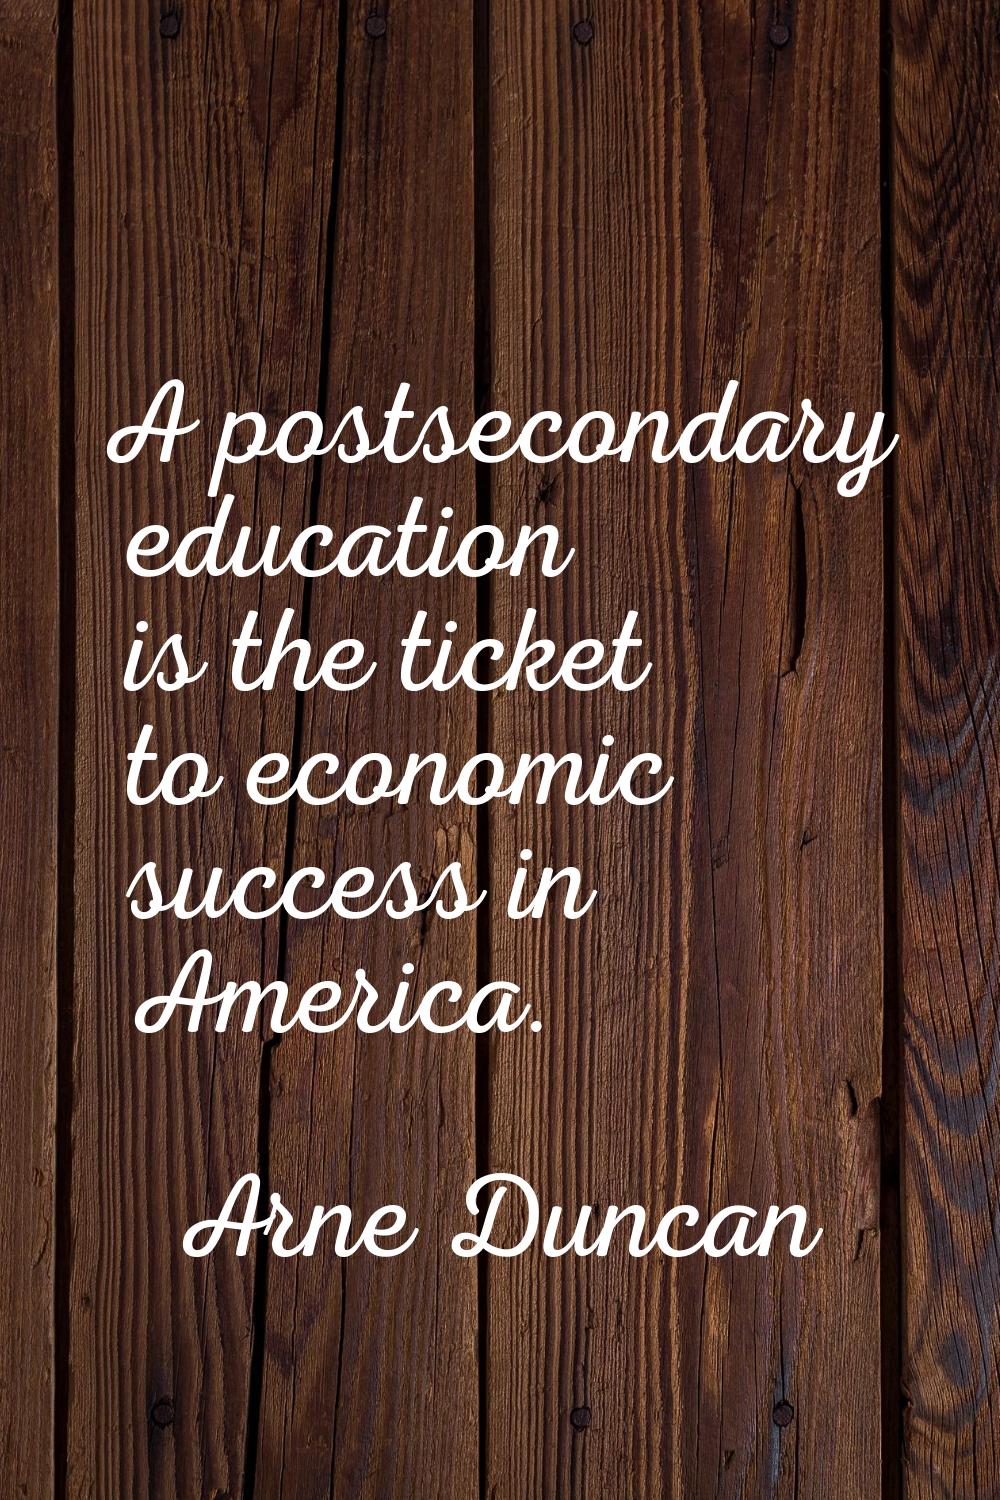 A postsecondary education is the ticket to economic success in America.